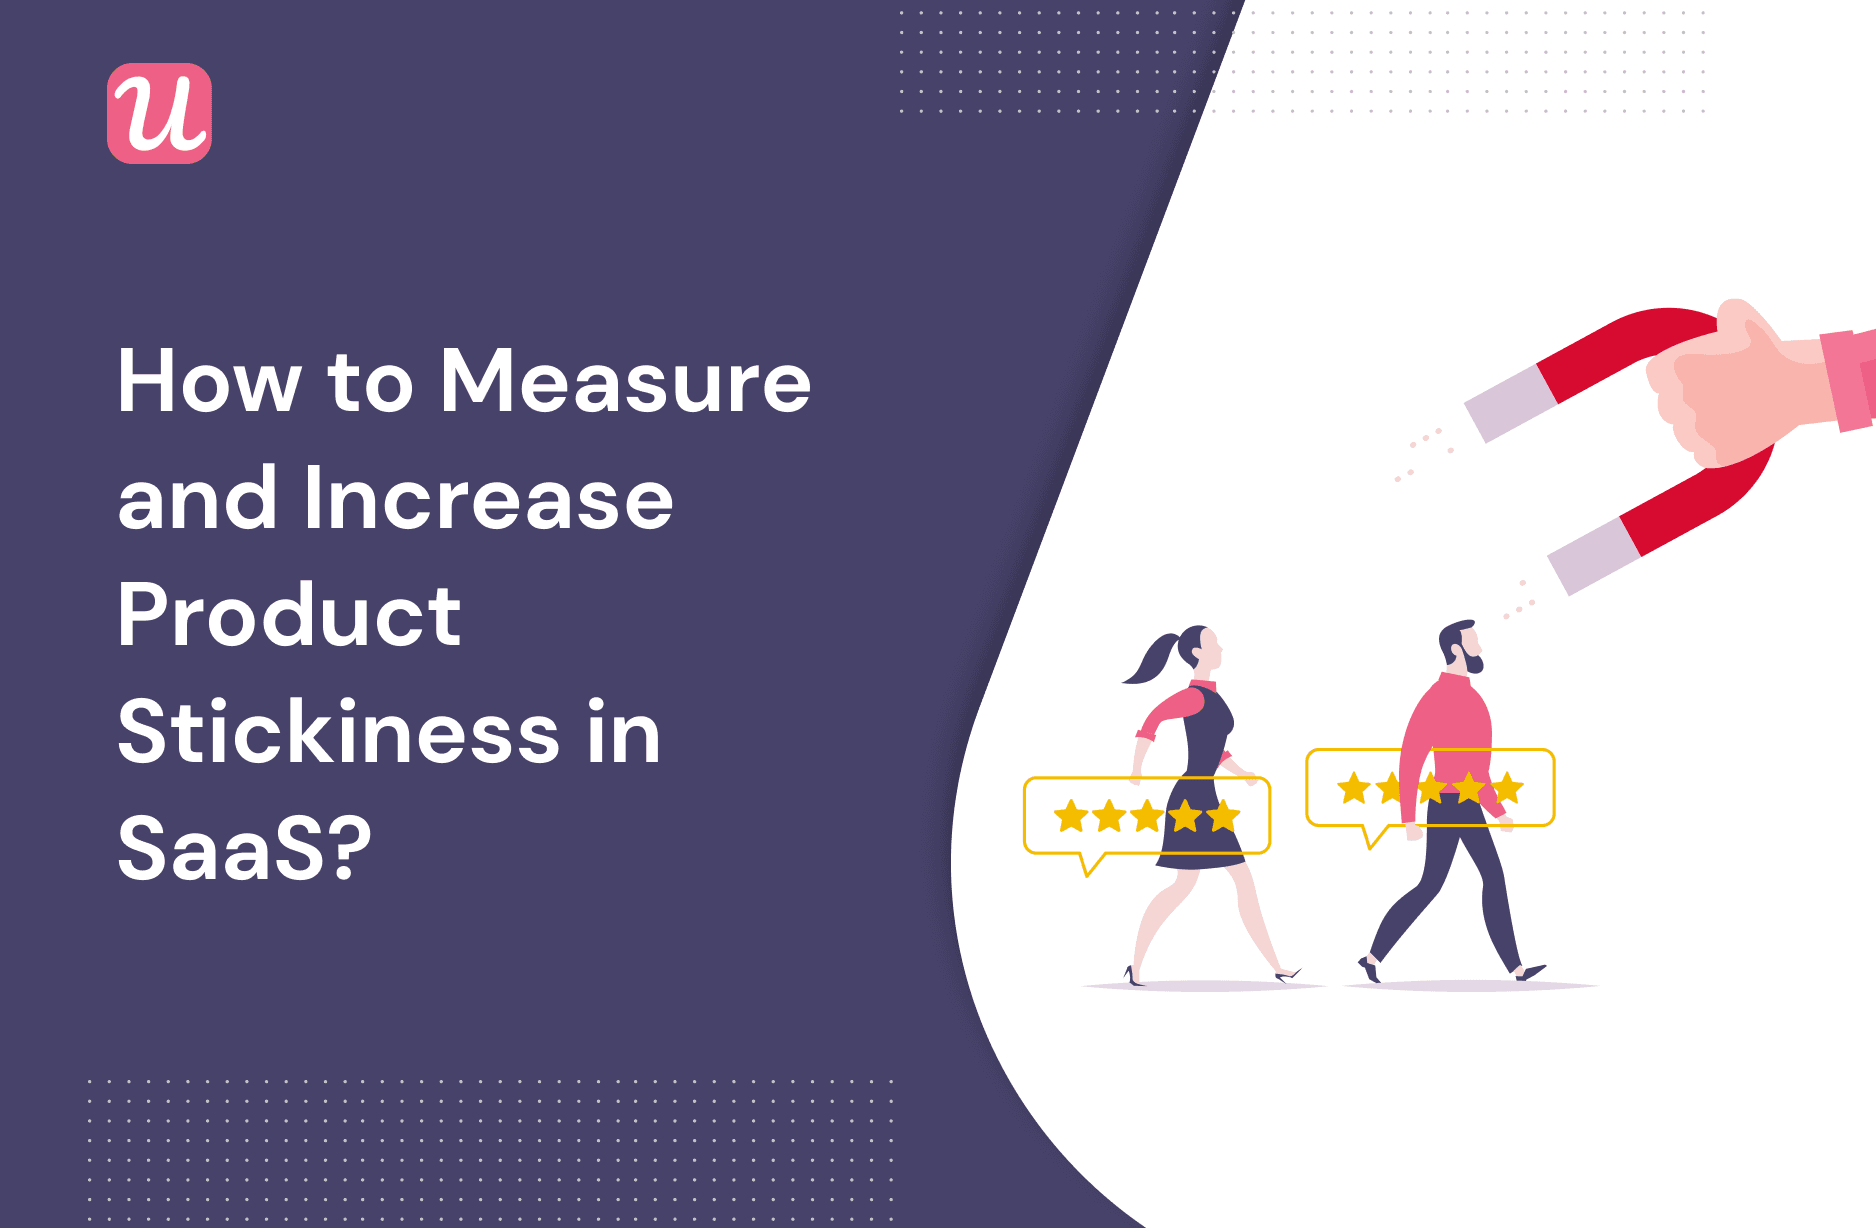 How To Measure And Increase Product Stickiness In SaaS?